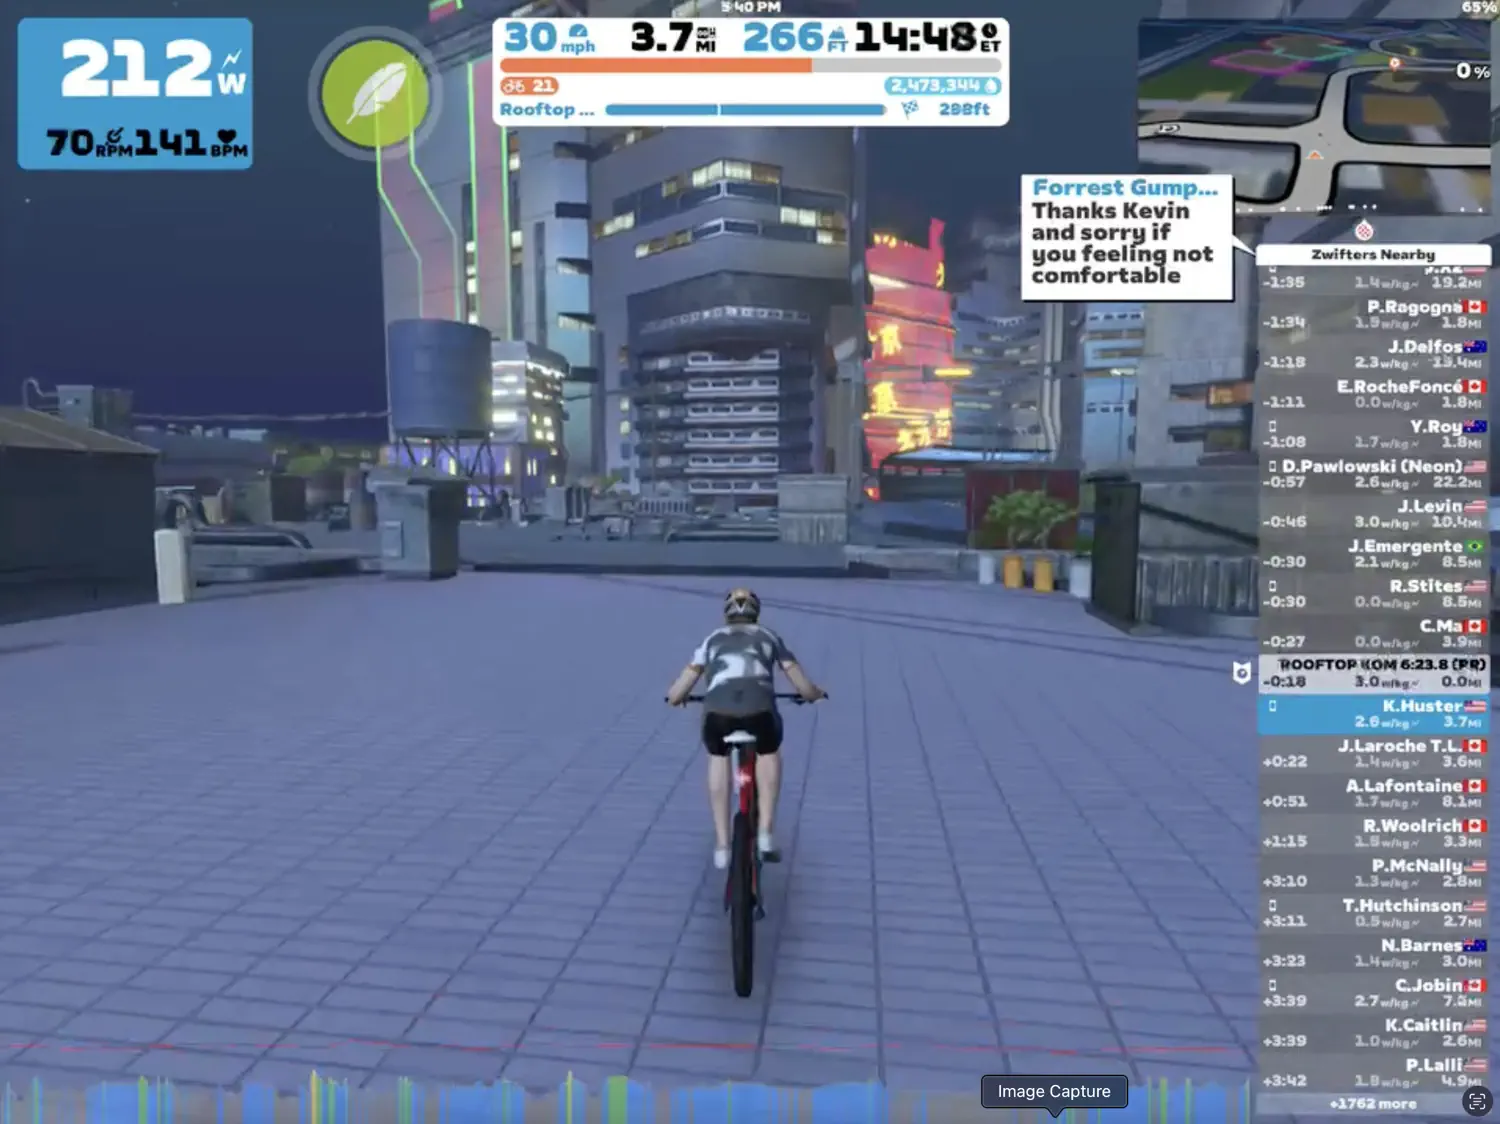 Keith is riding through a virtual city during one of his recent Zwift training rides